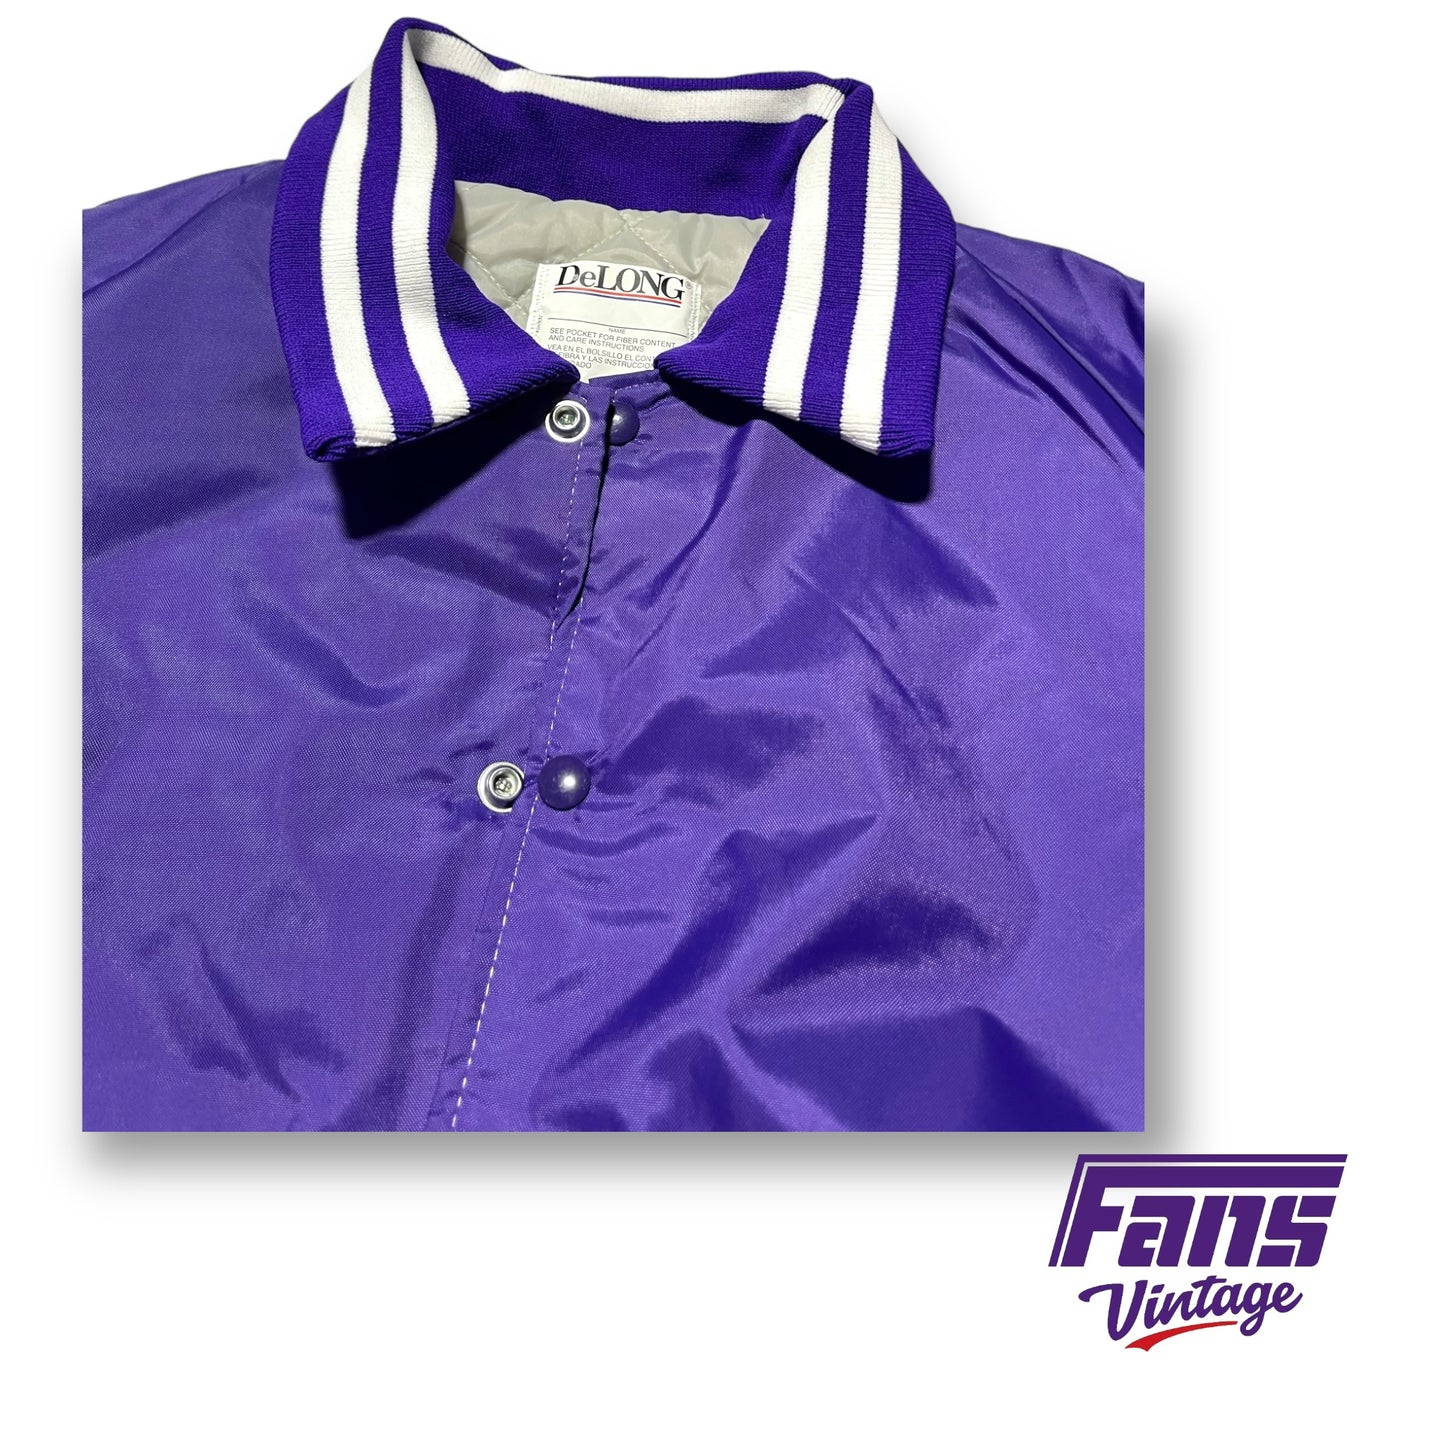 New with tags! 90s Vintage Purple Team Bomber Jackets - Ready to Customize!